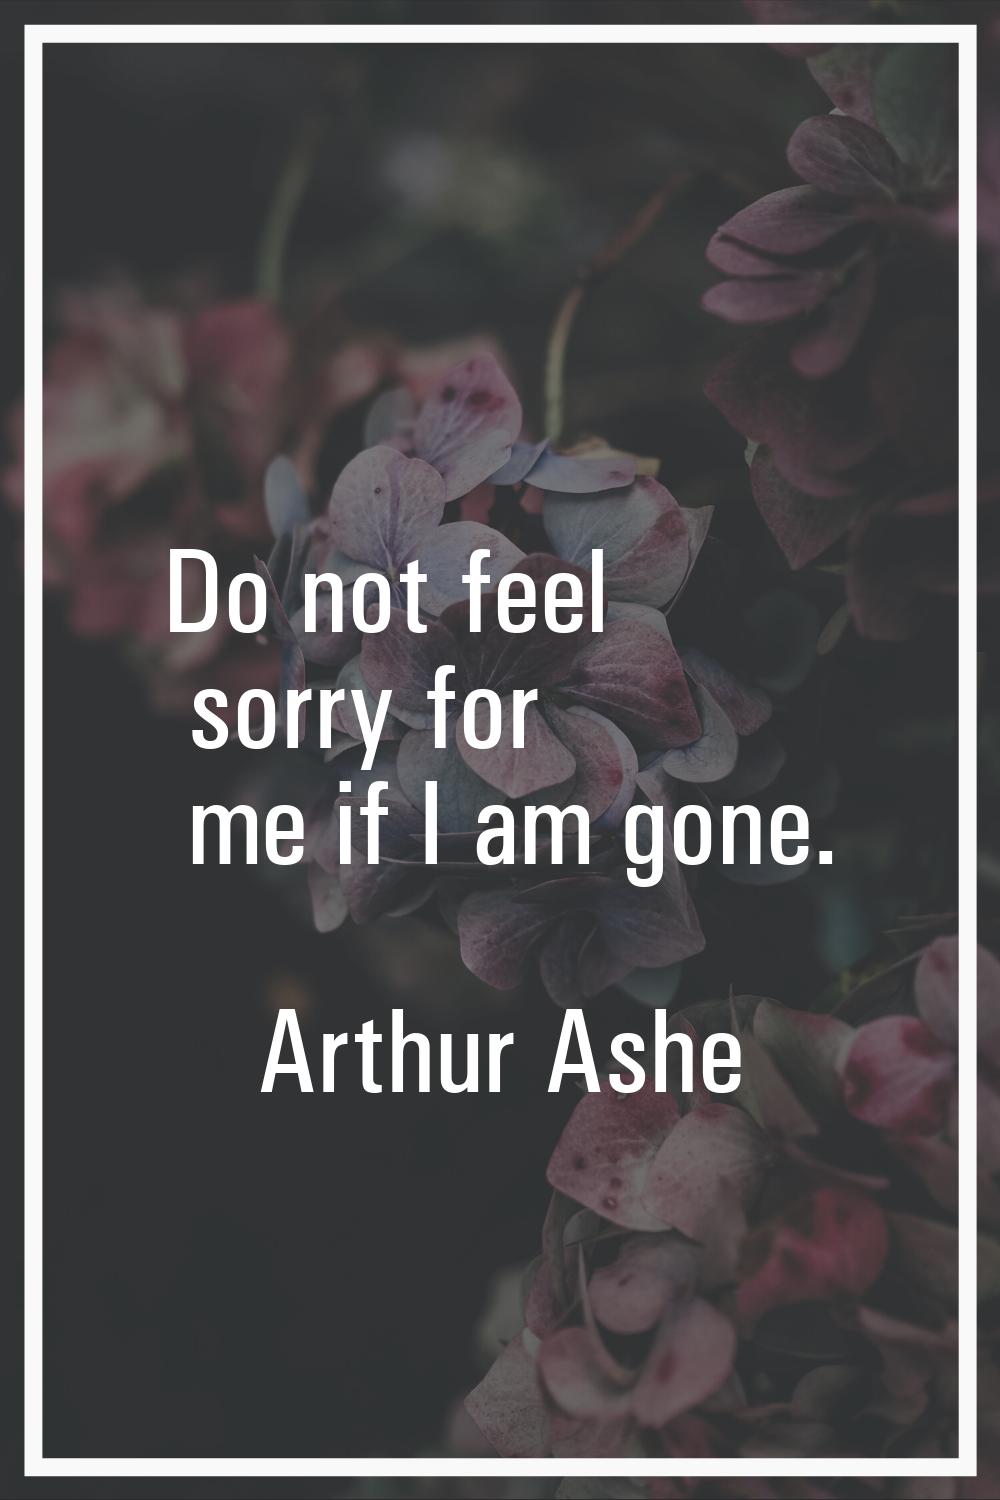 Do not feel sorry for me if I am gone.